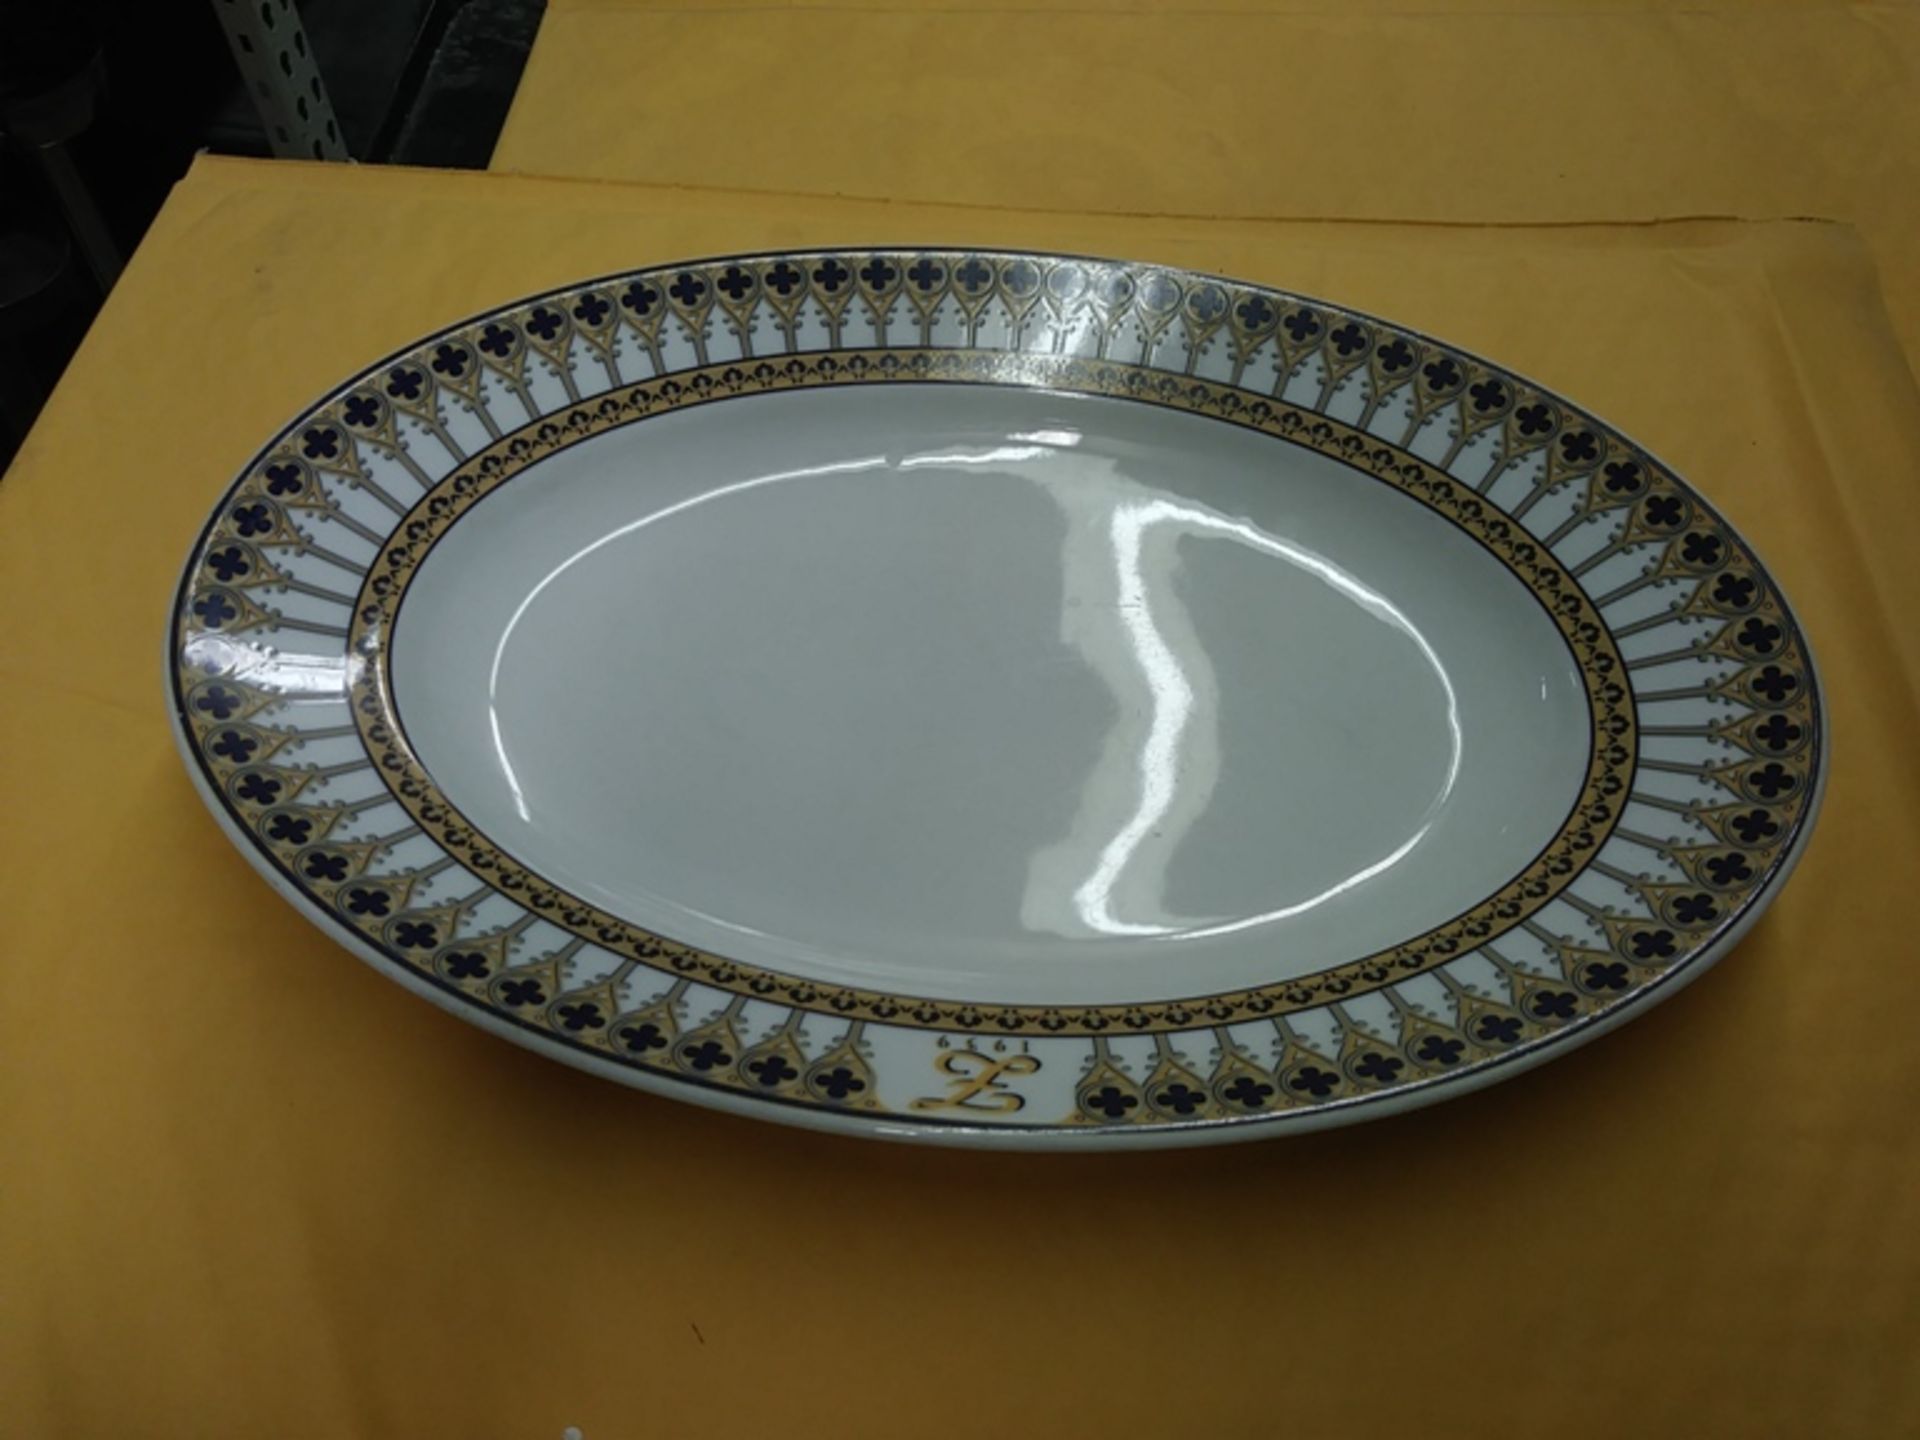 NEW 14" X 9" SCHONWALD OVAL PLATTER (INCLUDES QTY: 7) - Image 2 of 4